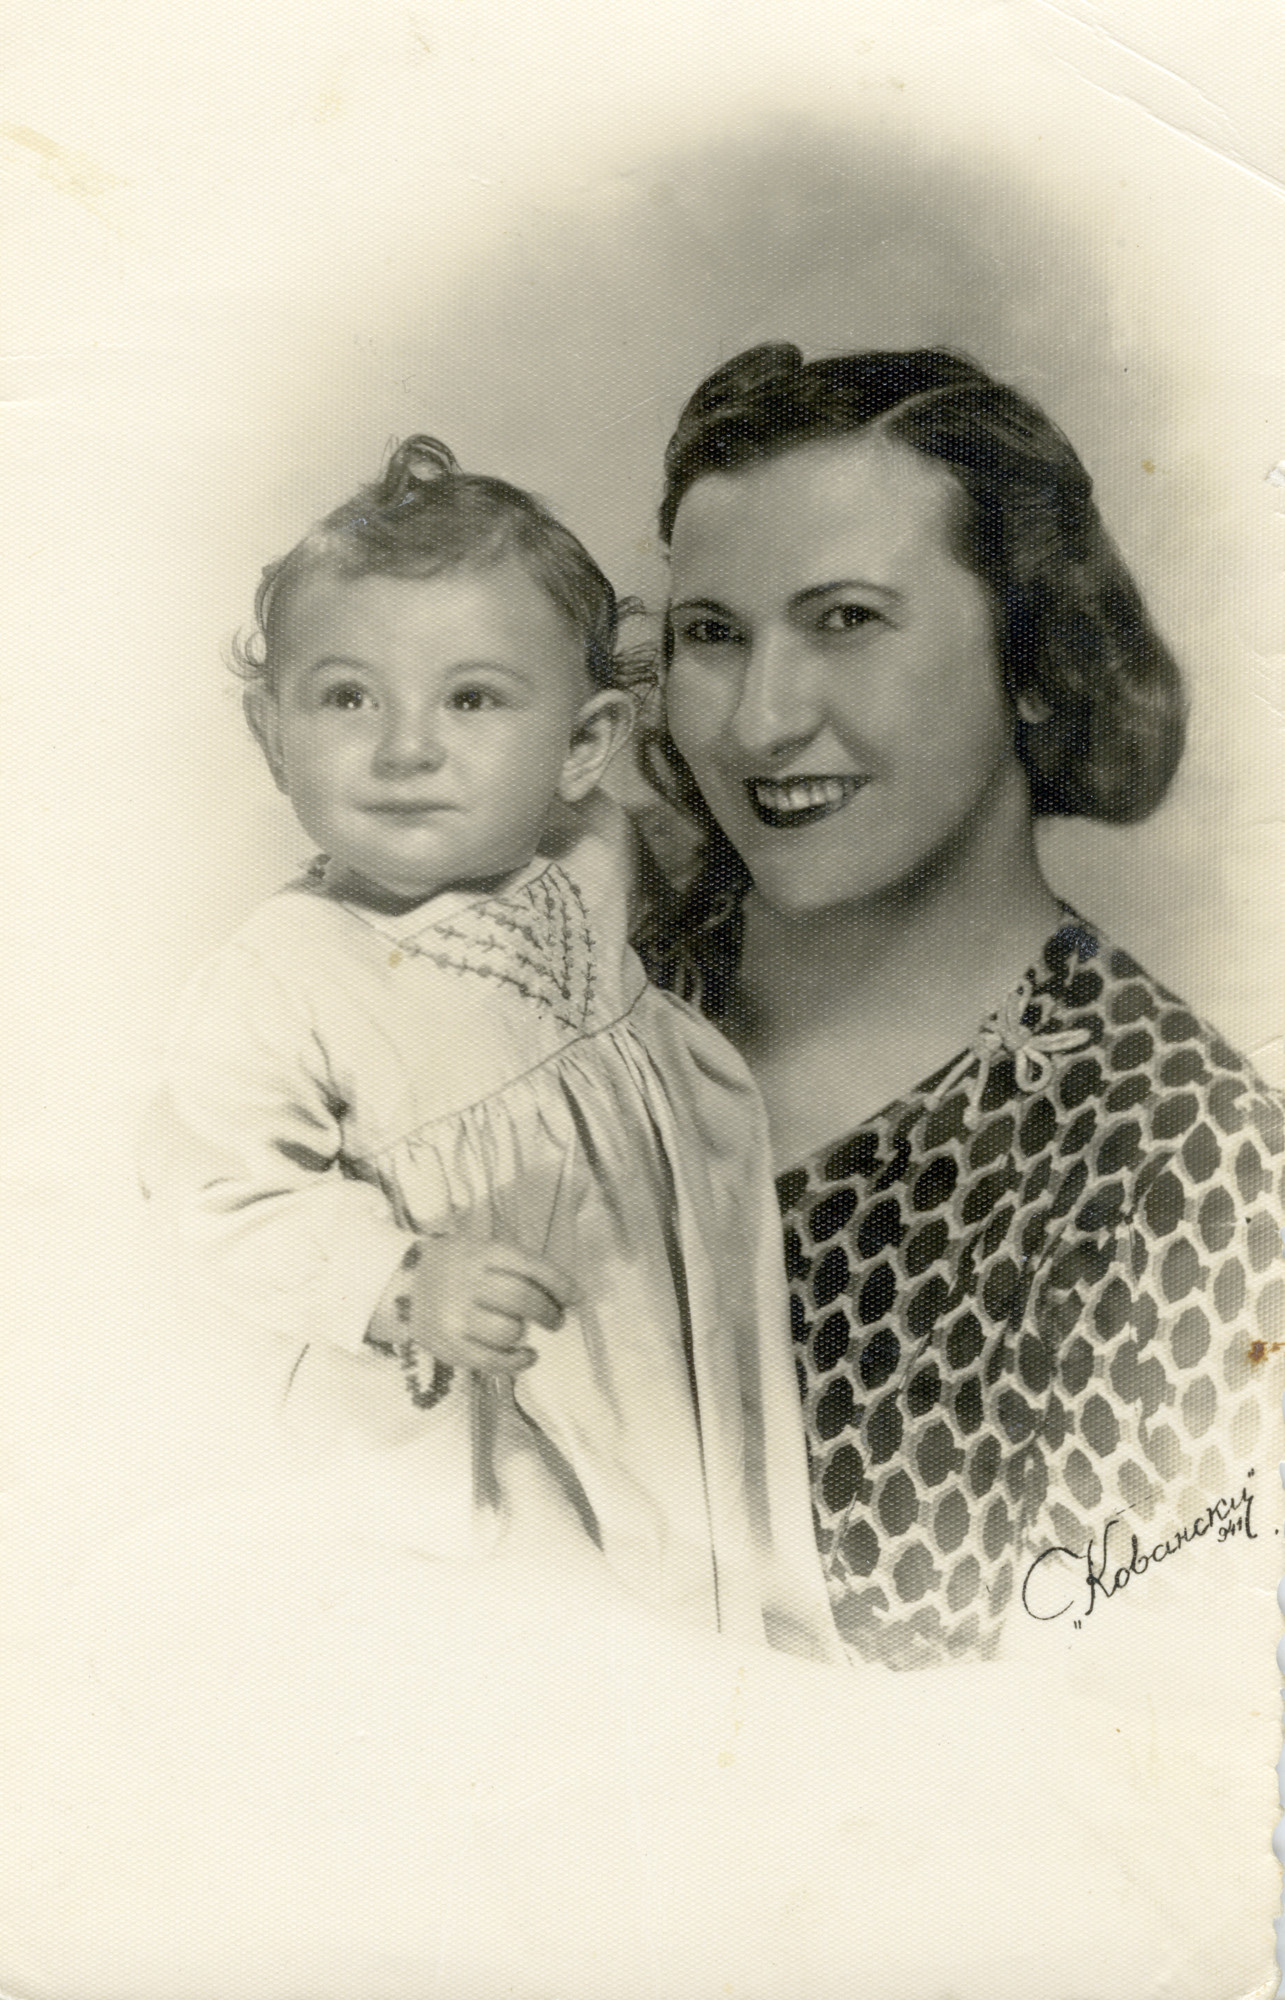 Wartime portrait of a Macedonian Jewish mother and daughter.

Pictured are Anna Fransevic and her oldest daughter, Rina.